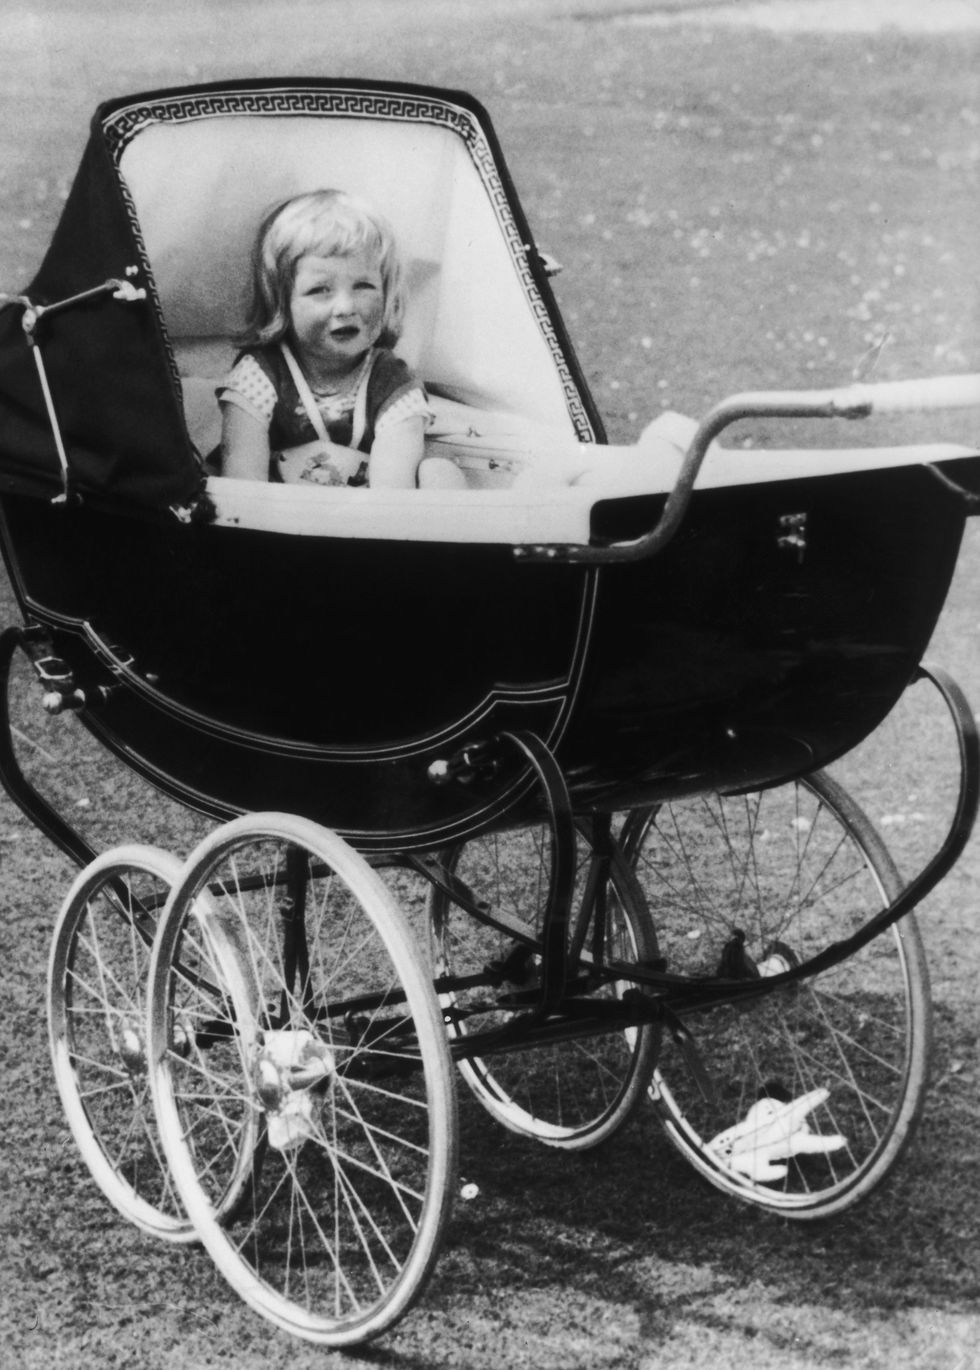 Baby carriage, Product, Baby Products, Vehicle, Black-and-white, Carriage, Photography, Horse and buggy, Monochrome, Style, 